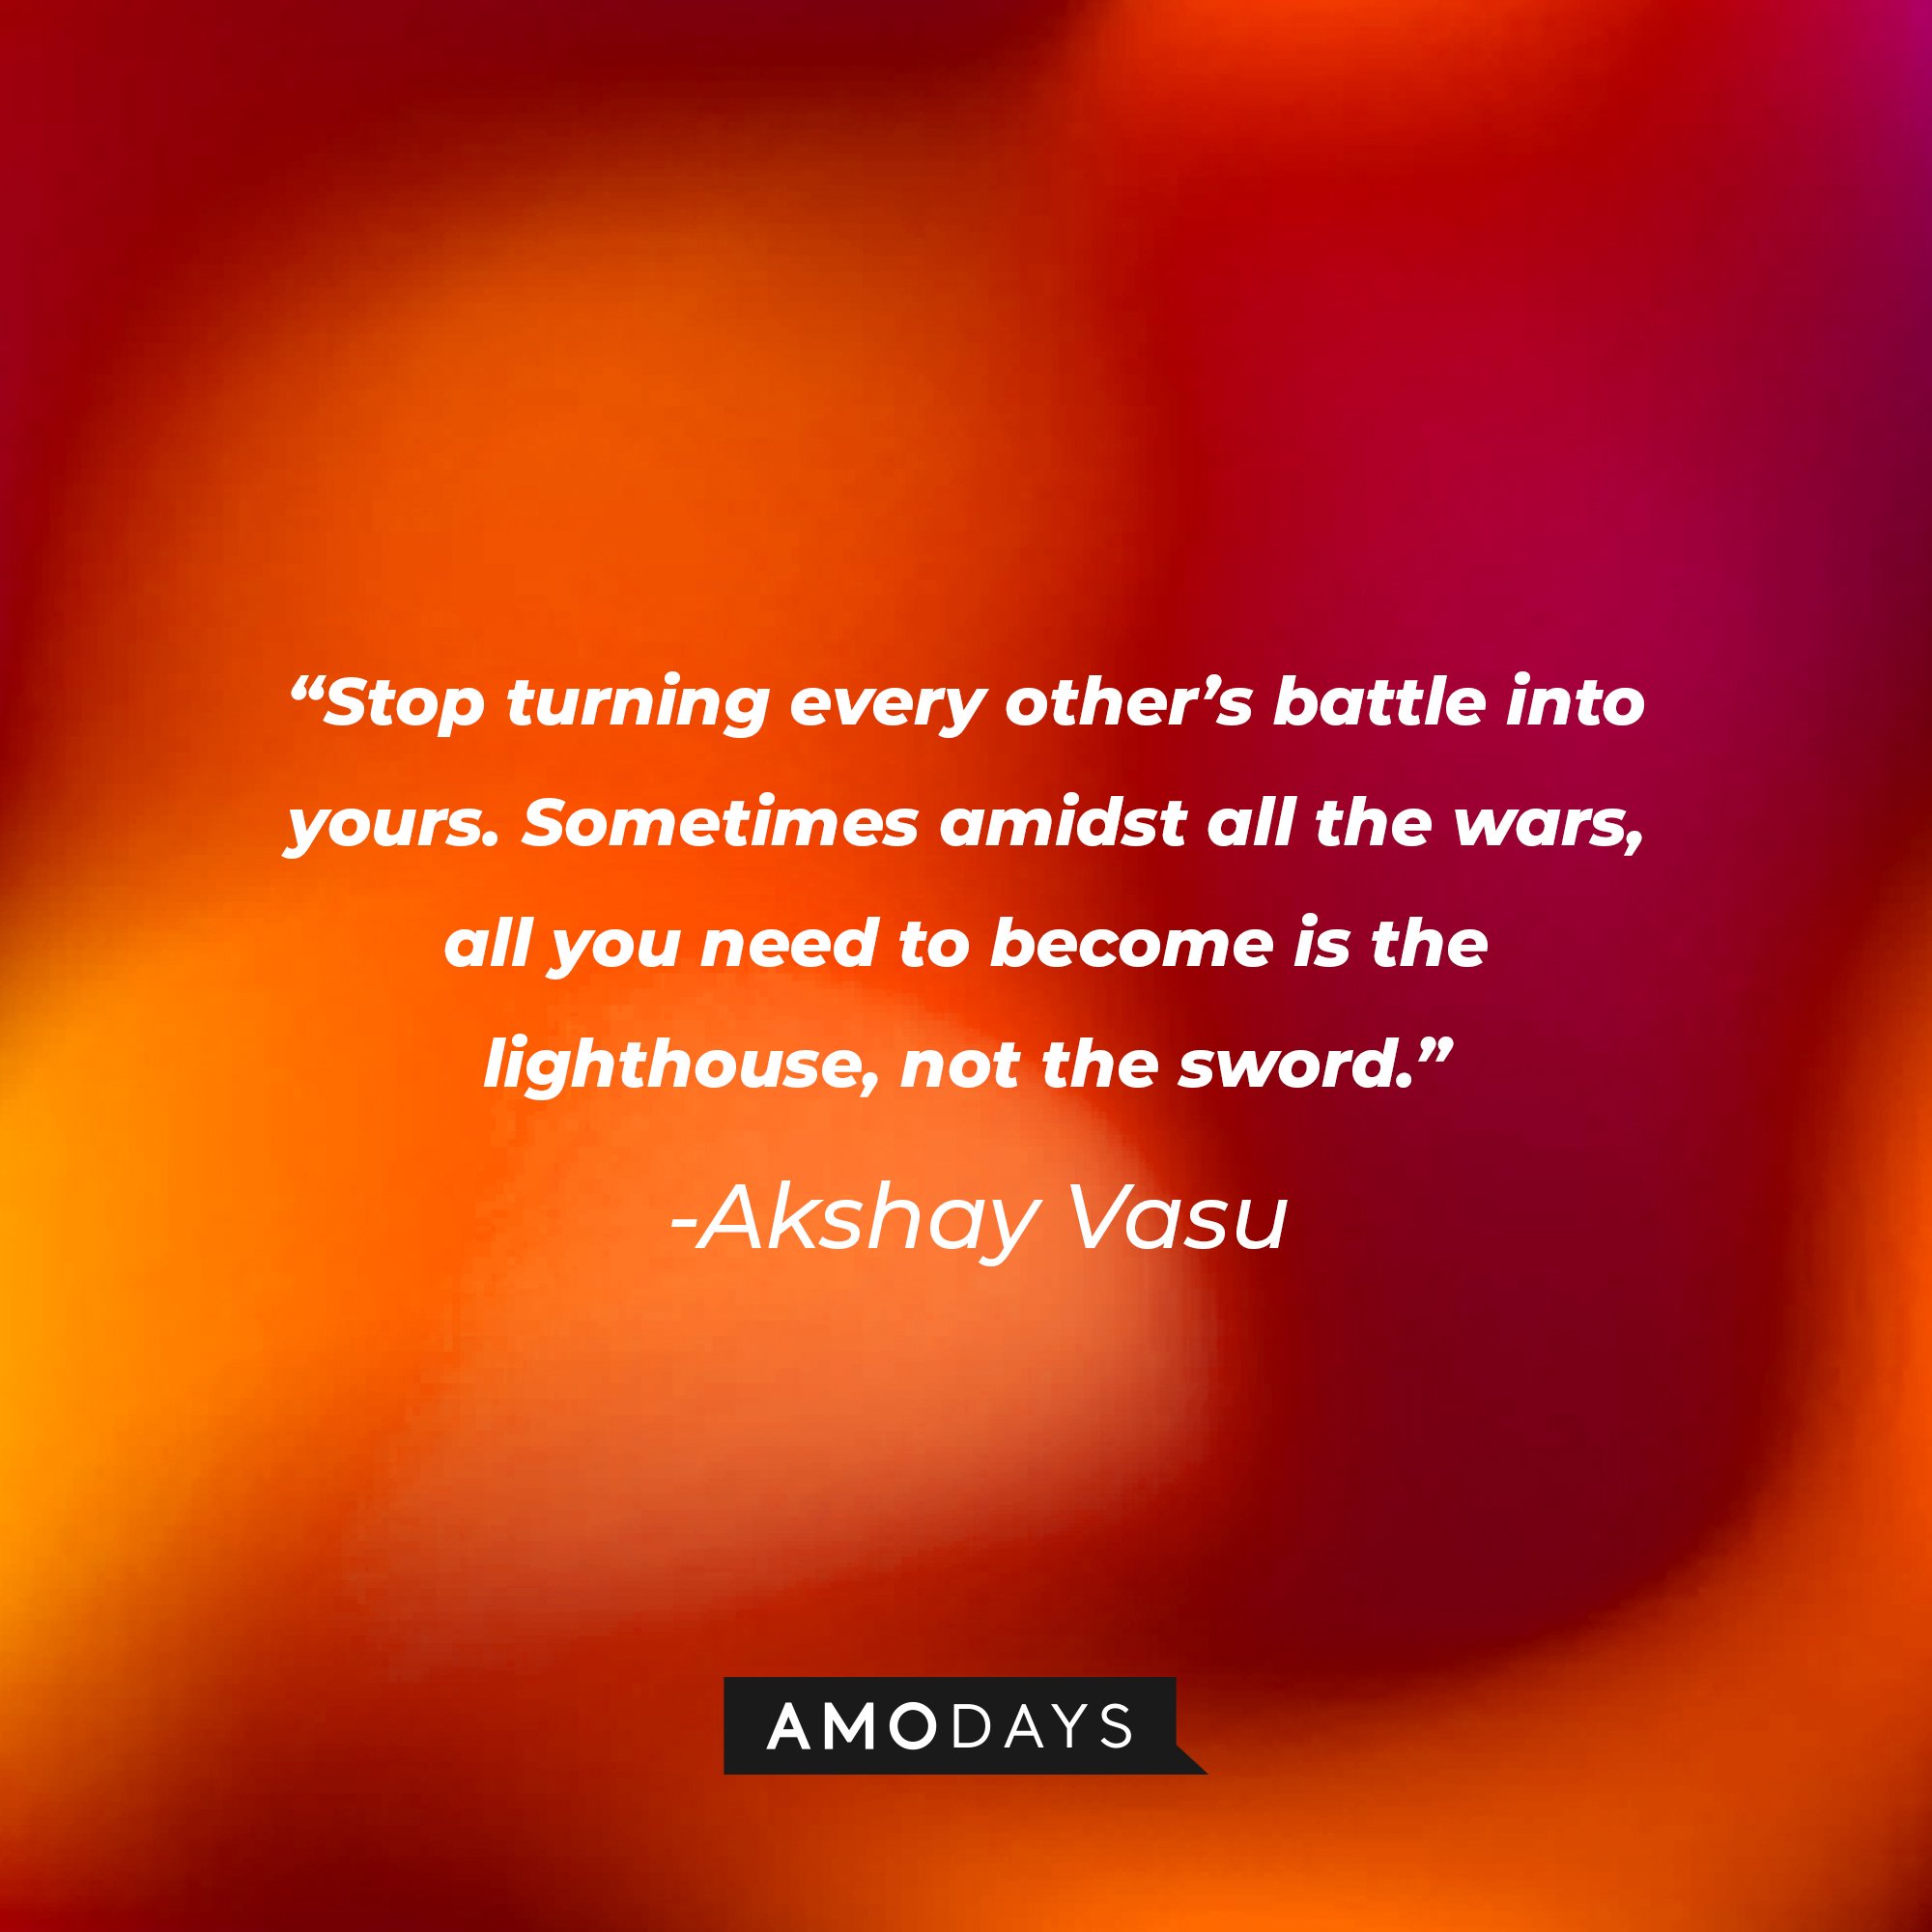 Akshay Vasu’s quote: “Stop turning every other’s battle into yours. Sometimes amidst all the wars, all you need to become is the lighthouse, not the sword.” | Image: AmoDays